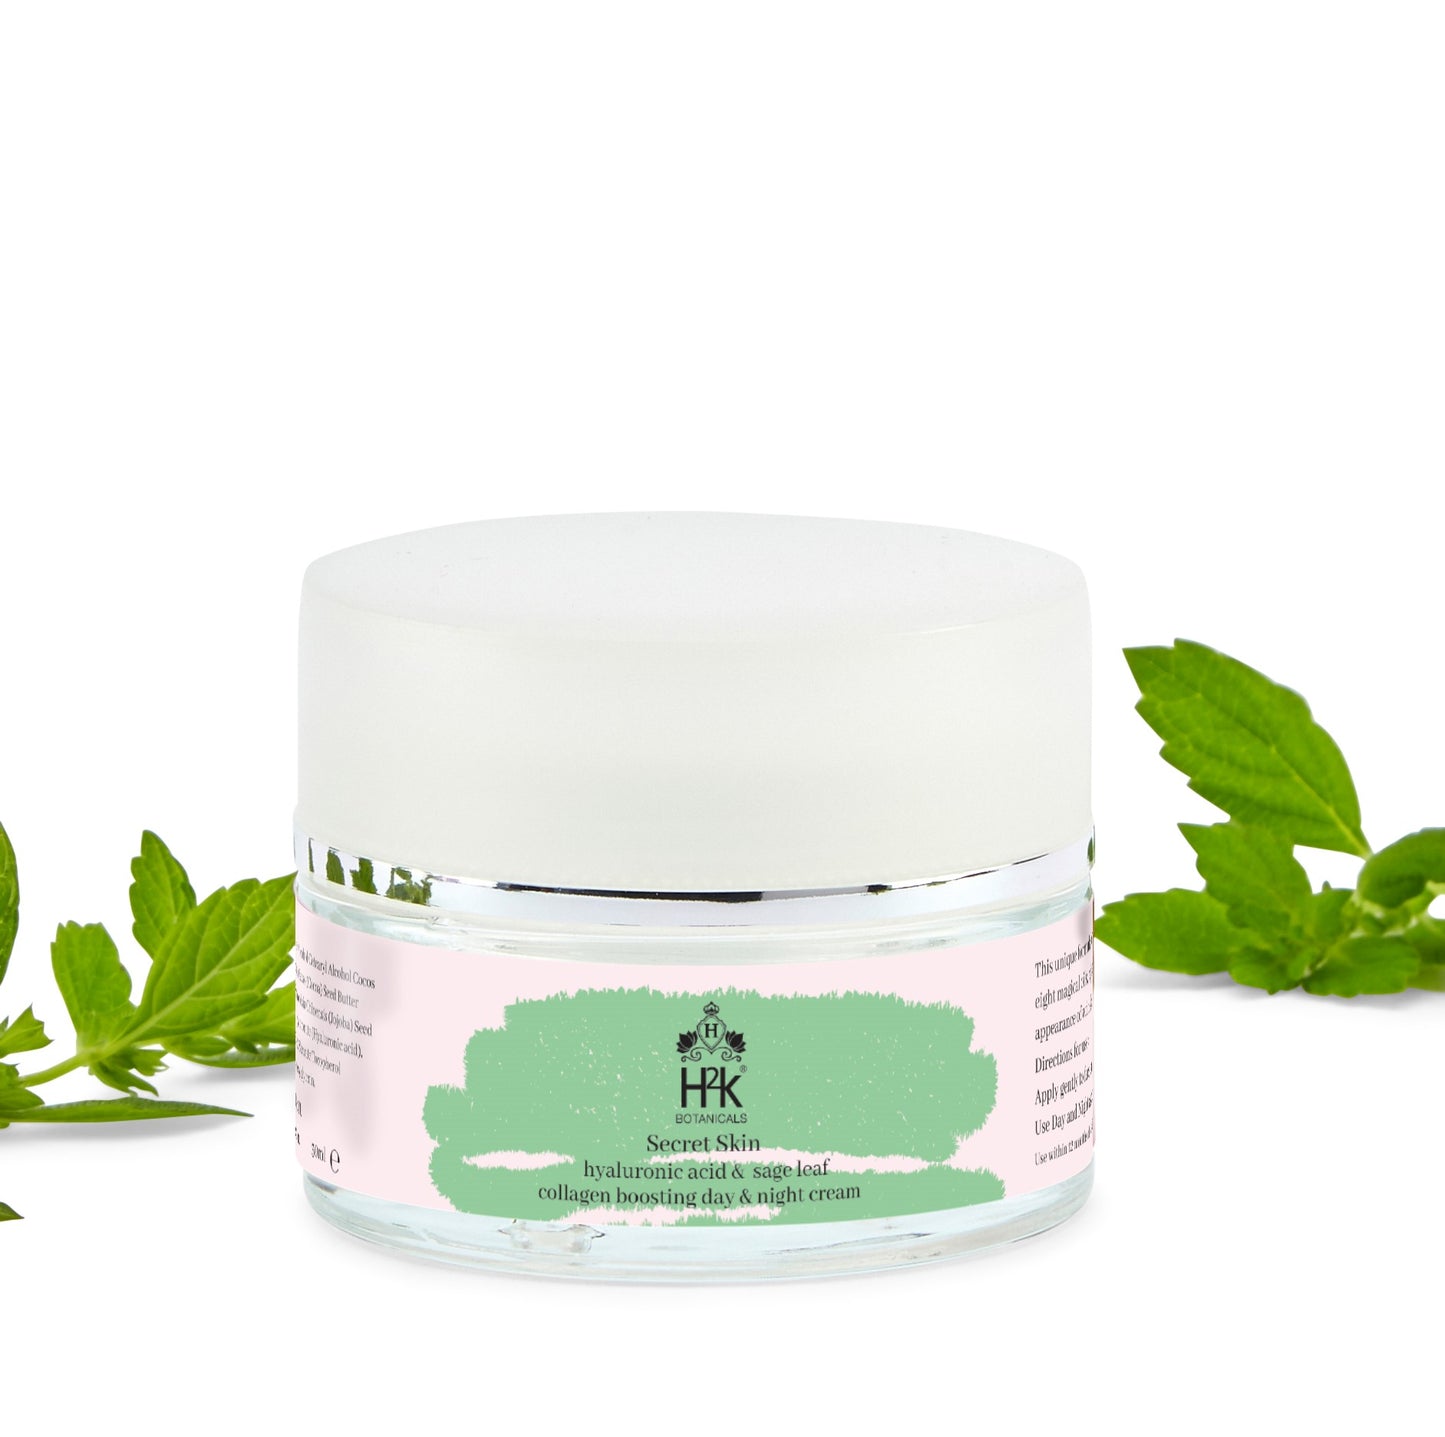 Mini-Day & Night Cream with 10ml Face Oil ...try-me size BACK IN STOCK